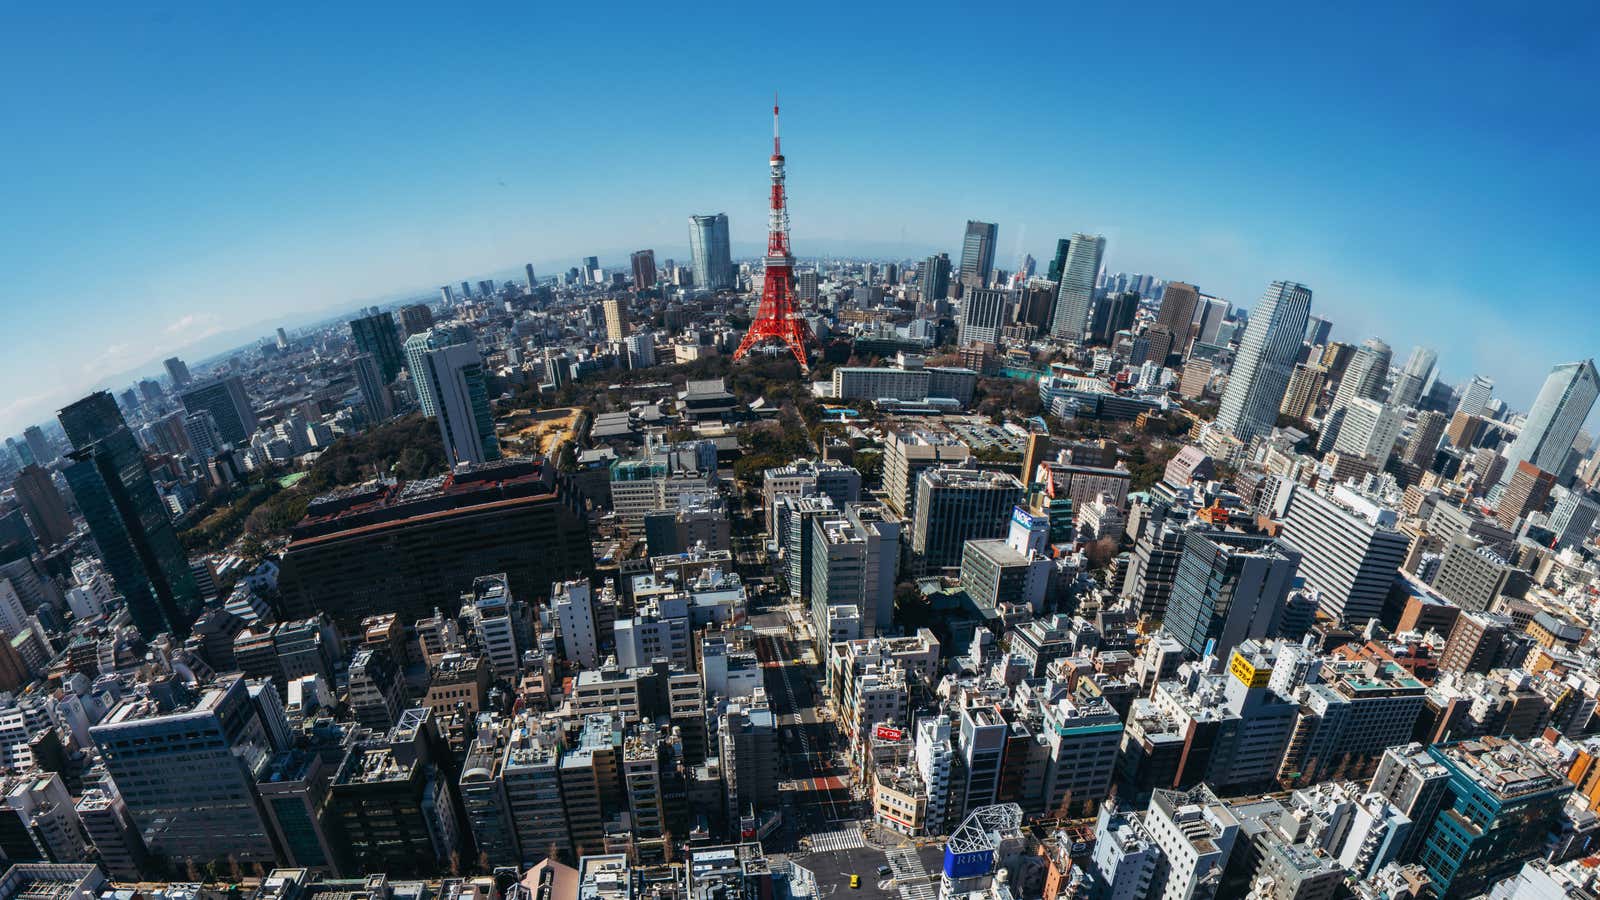 Tokyo remains one of the world’s most liveable metropolises.